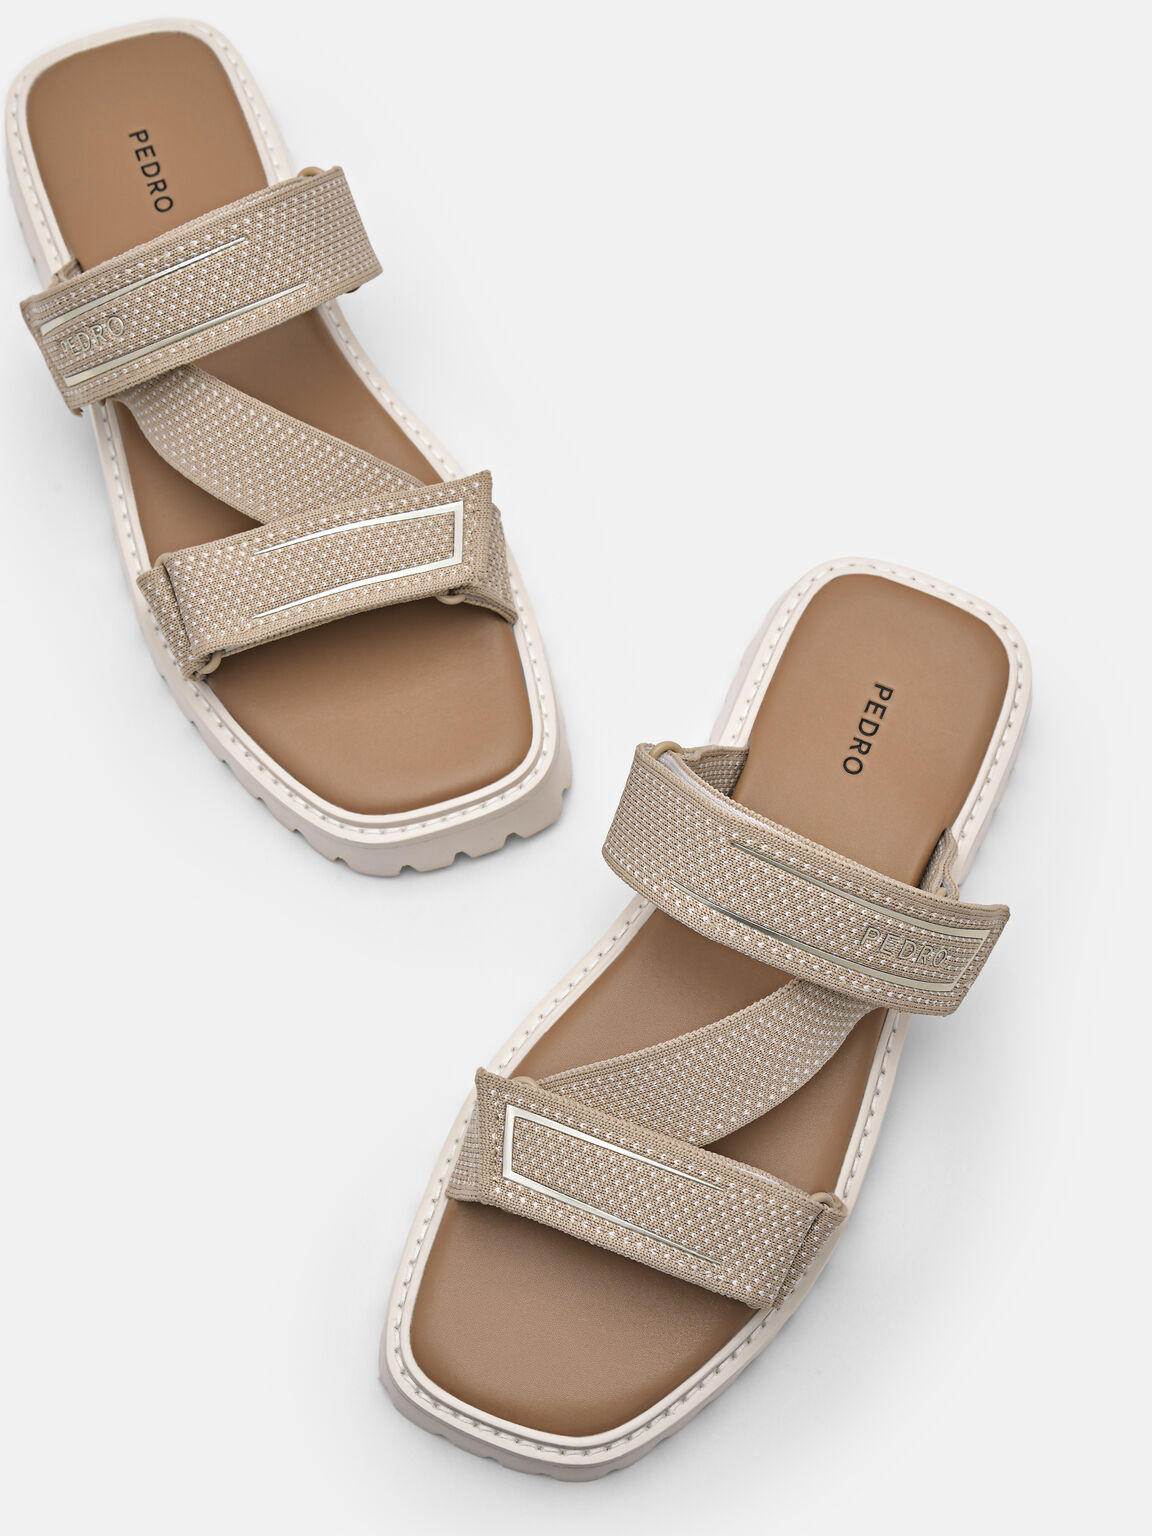 Ronni Knitted Sandals, Sand